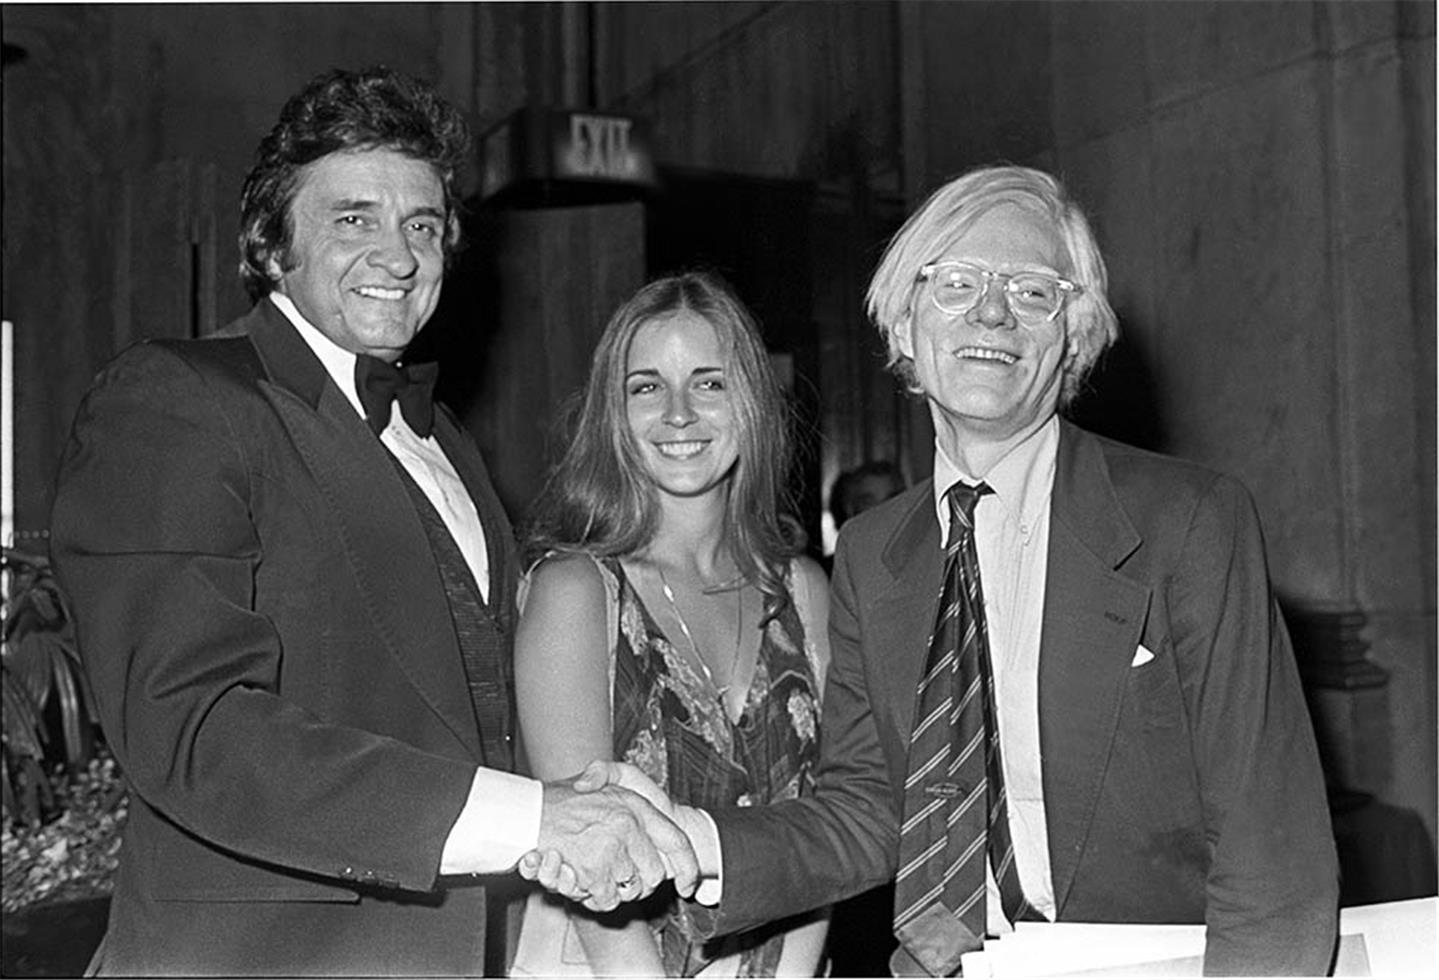  Charlyn Zlotnik Black and White Photograph - Johnny Cash, Carlene Carter and Andy Warhol